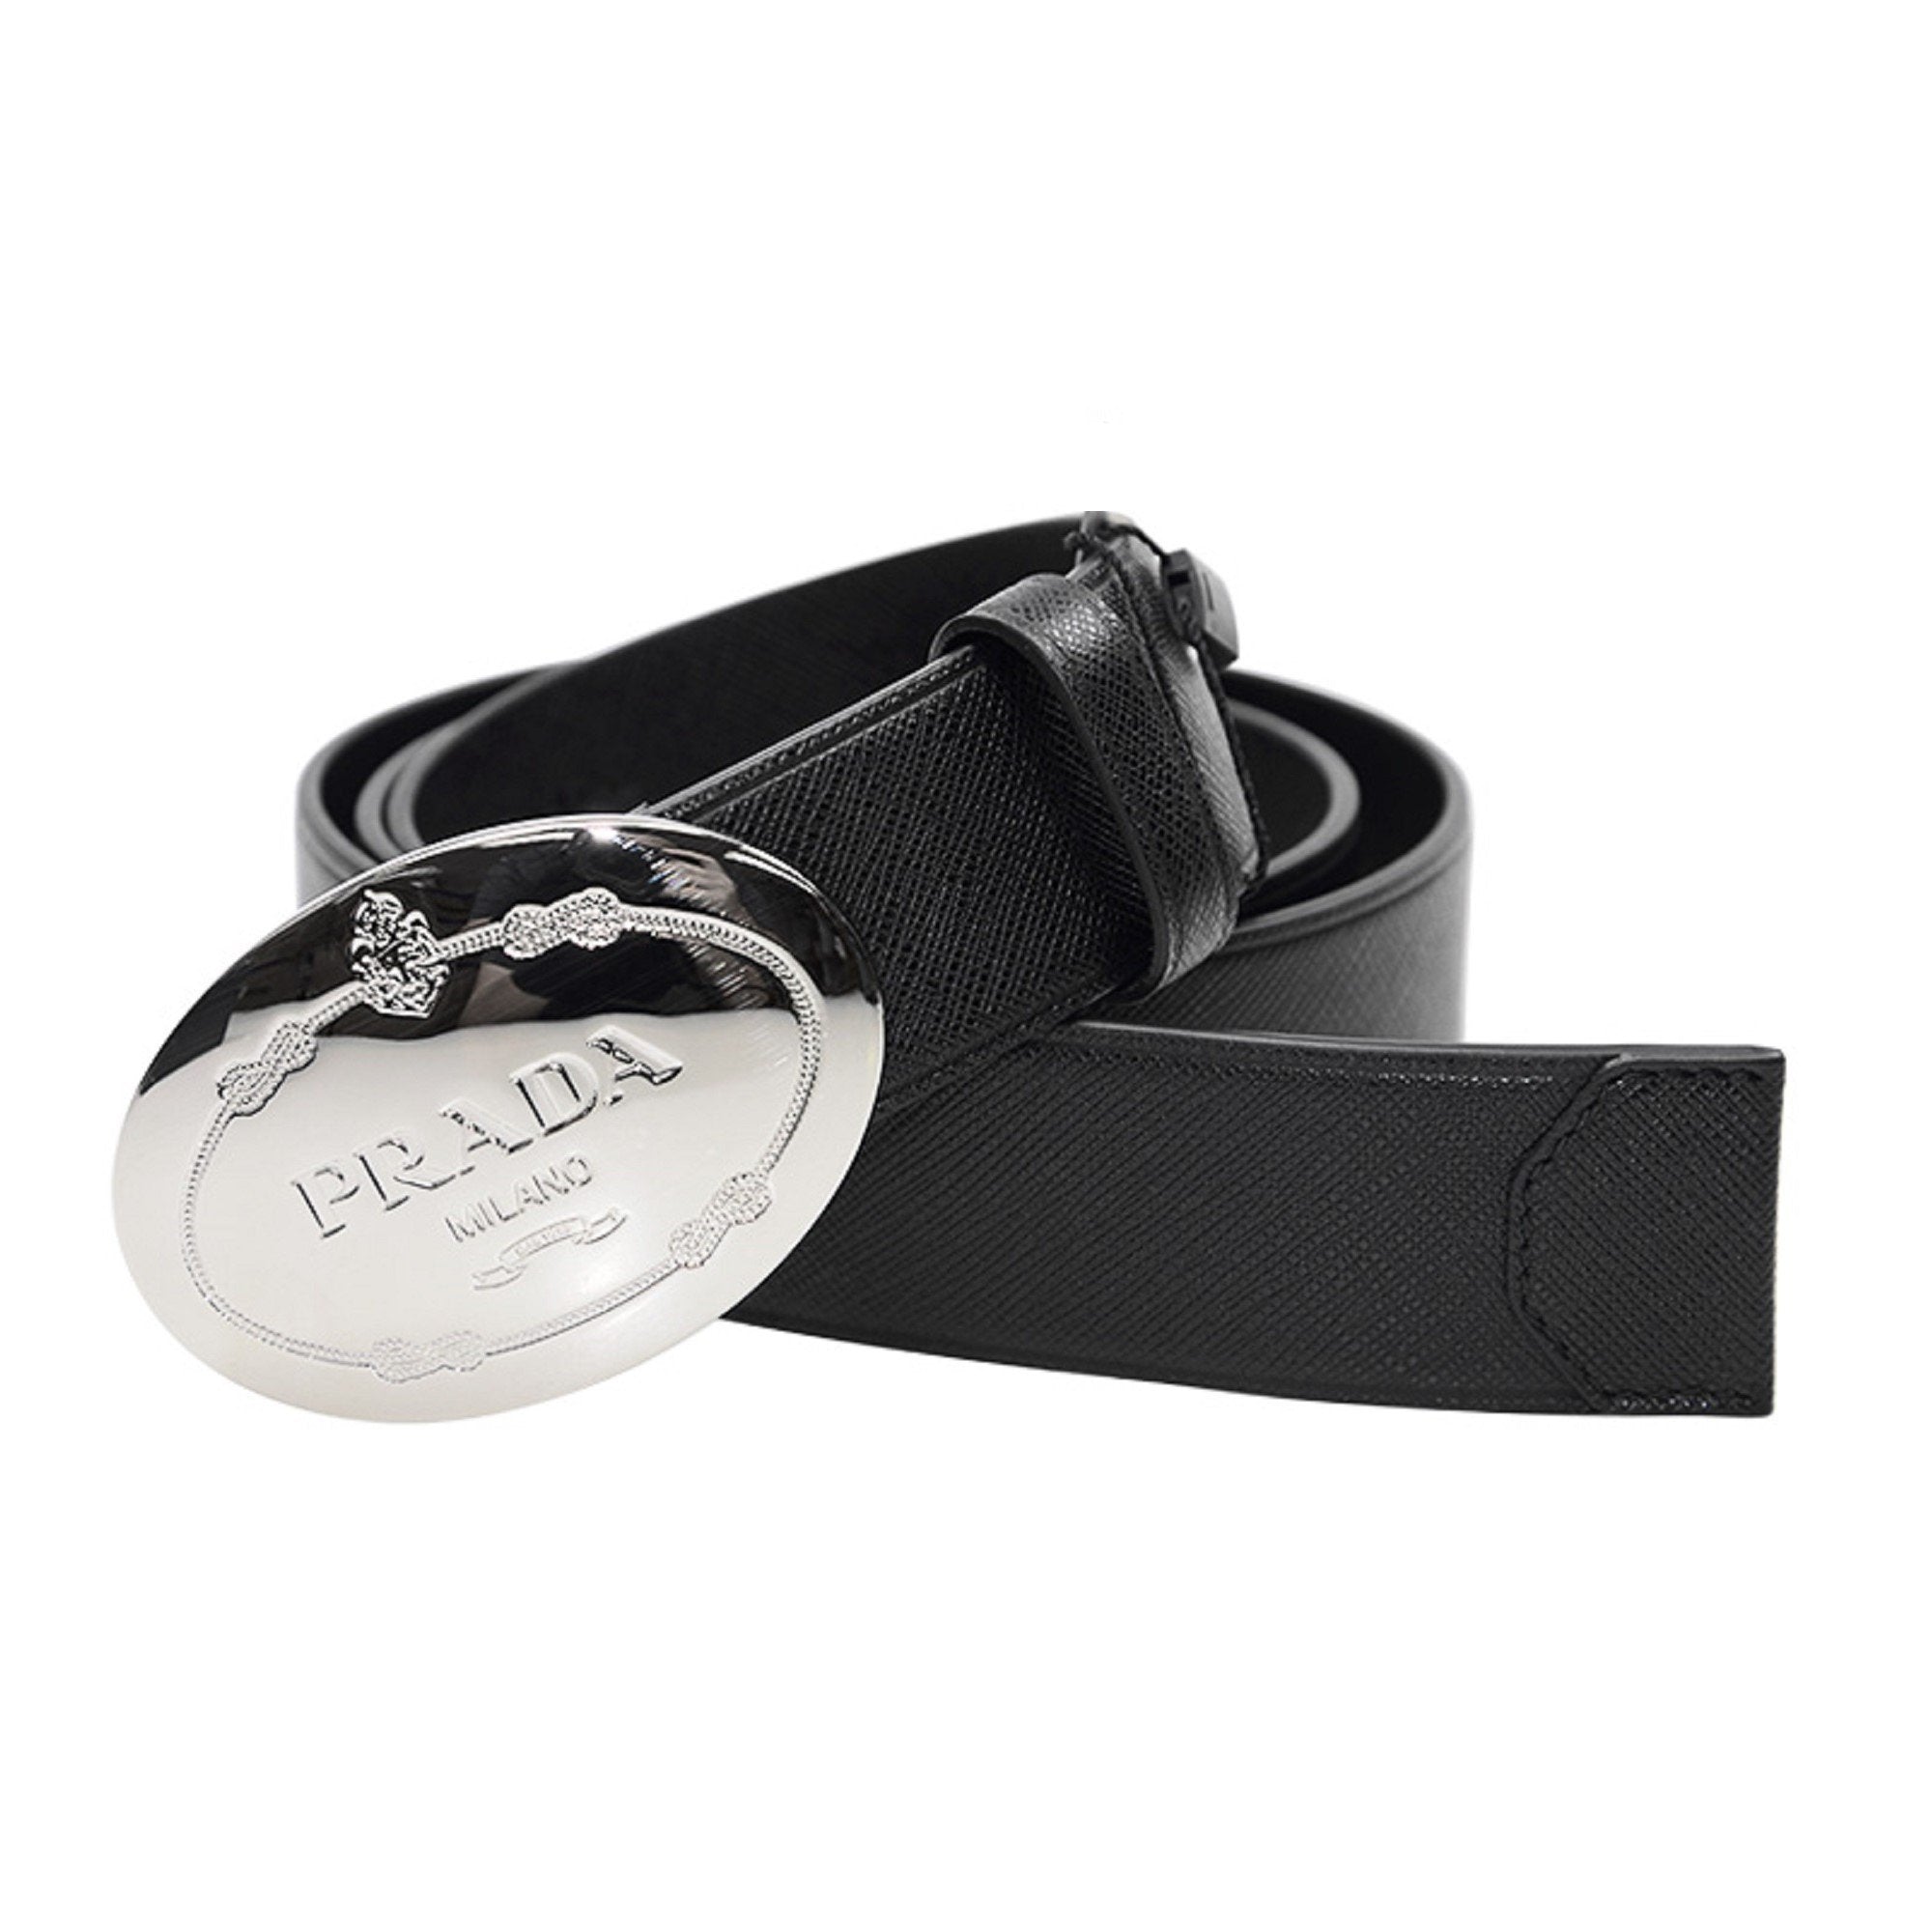 Prada Black Saffiano Leather Engraved Oval Plaque Buckle Size: 105/42 Belt 2CM046 at_Queen_Bee_of_Beverly_Hills